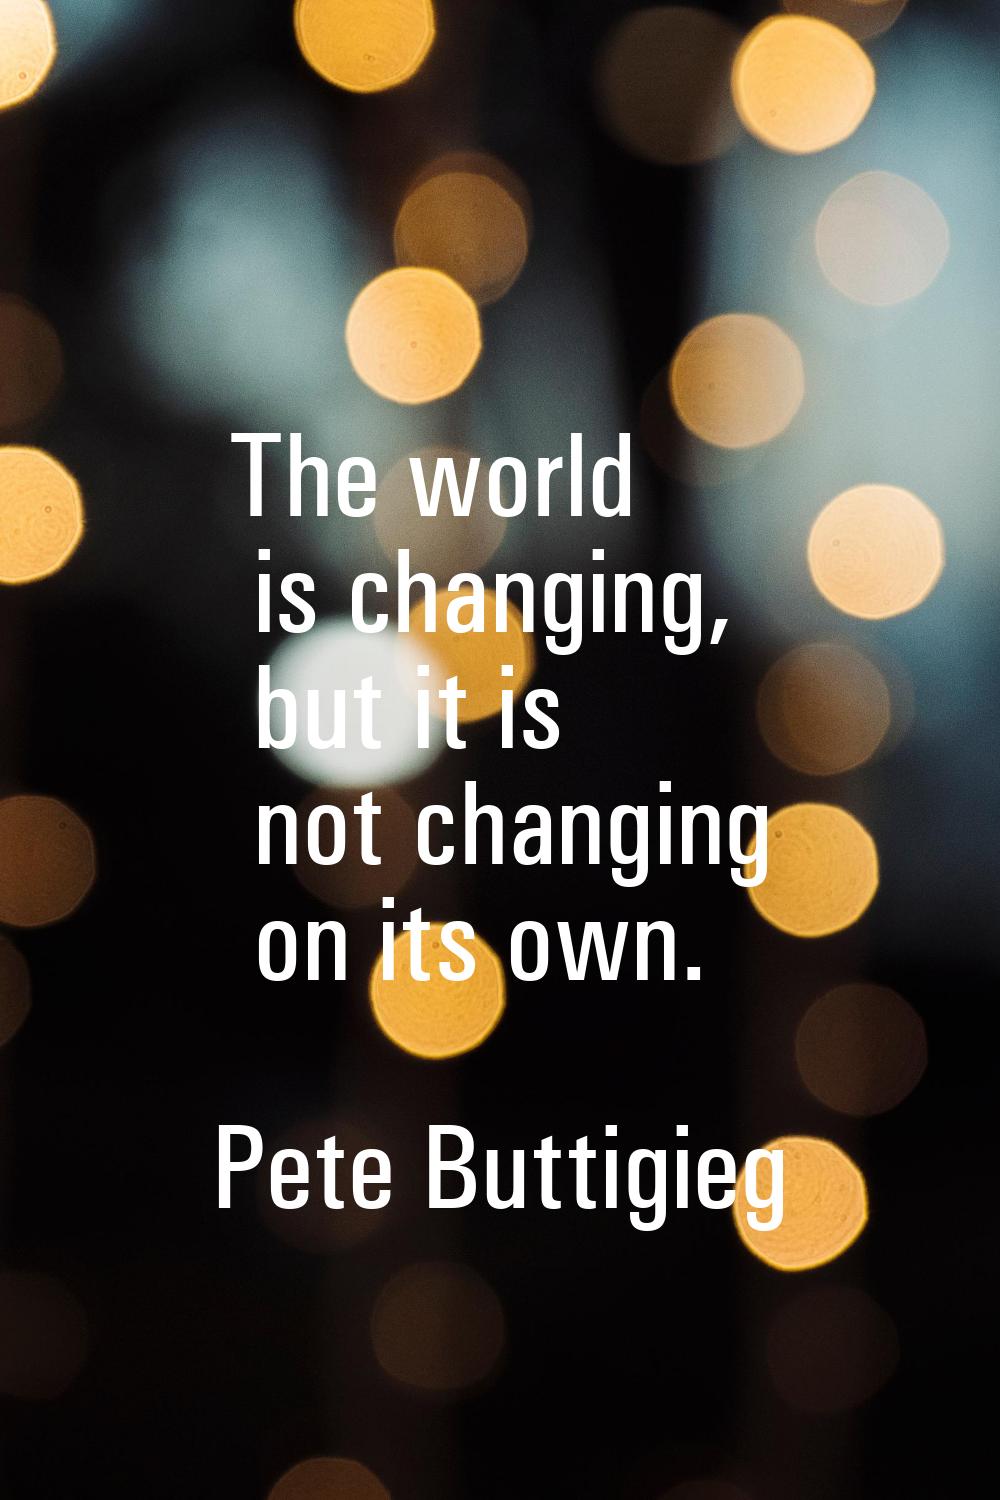 The world is changing, but it is not changing on its own.